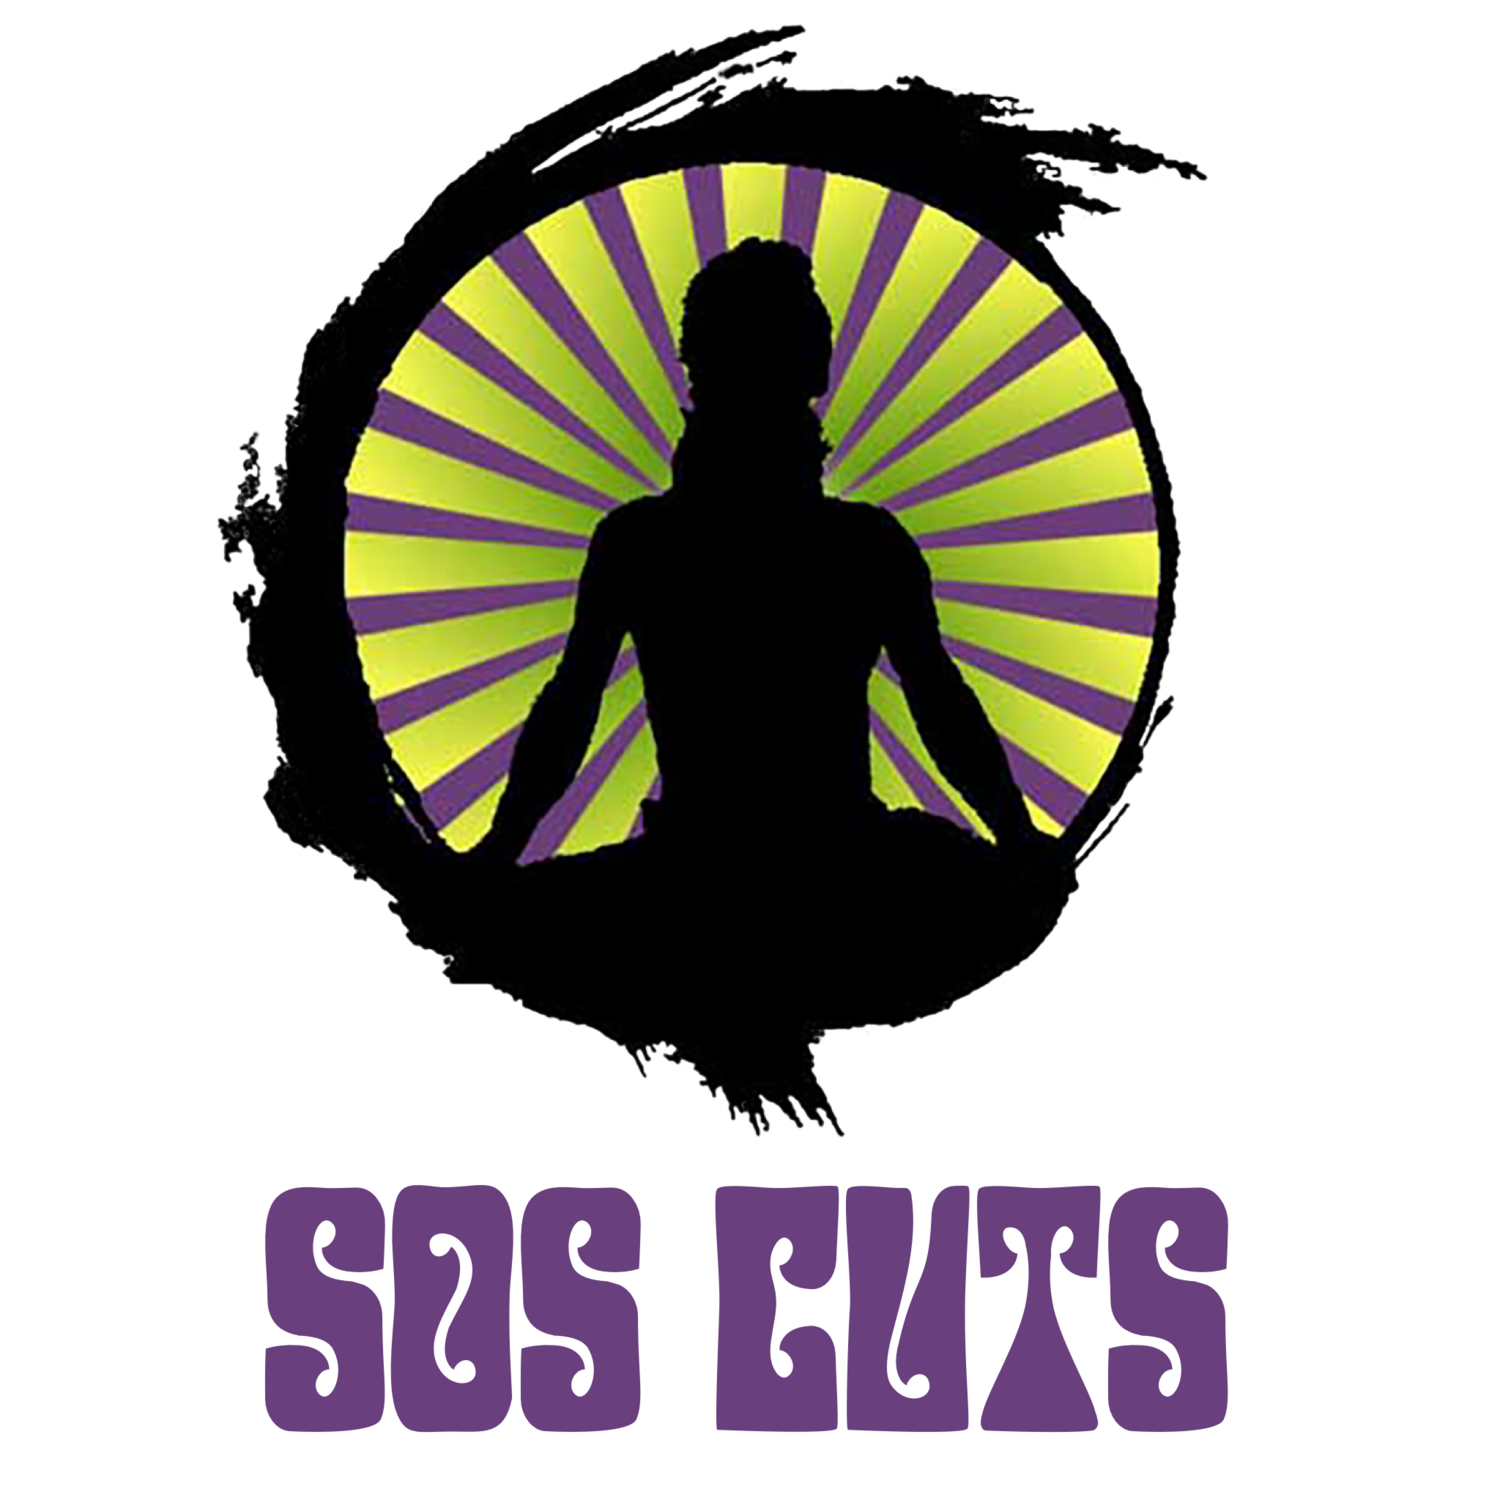 Cuts - Custom Donation Amount - Specify type(s) in notes please